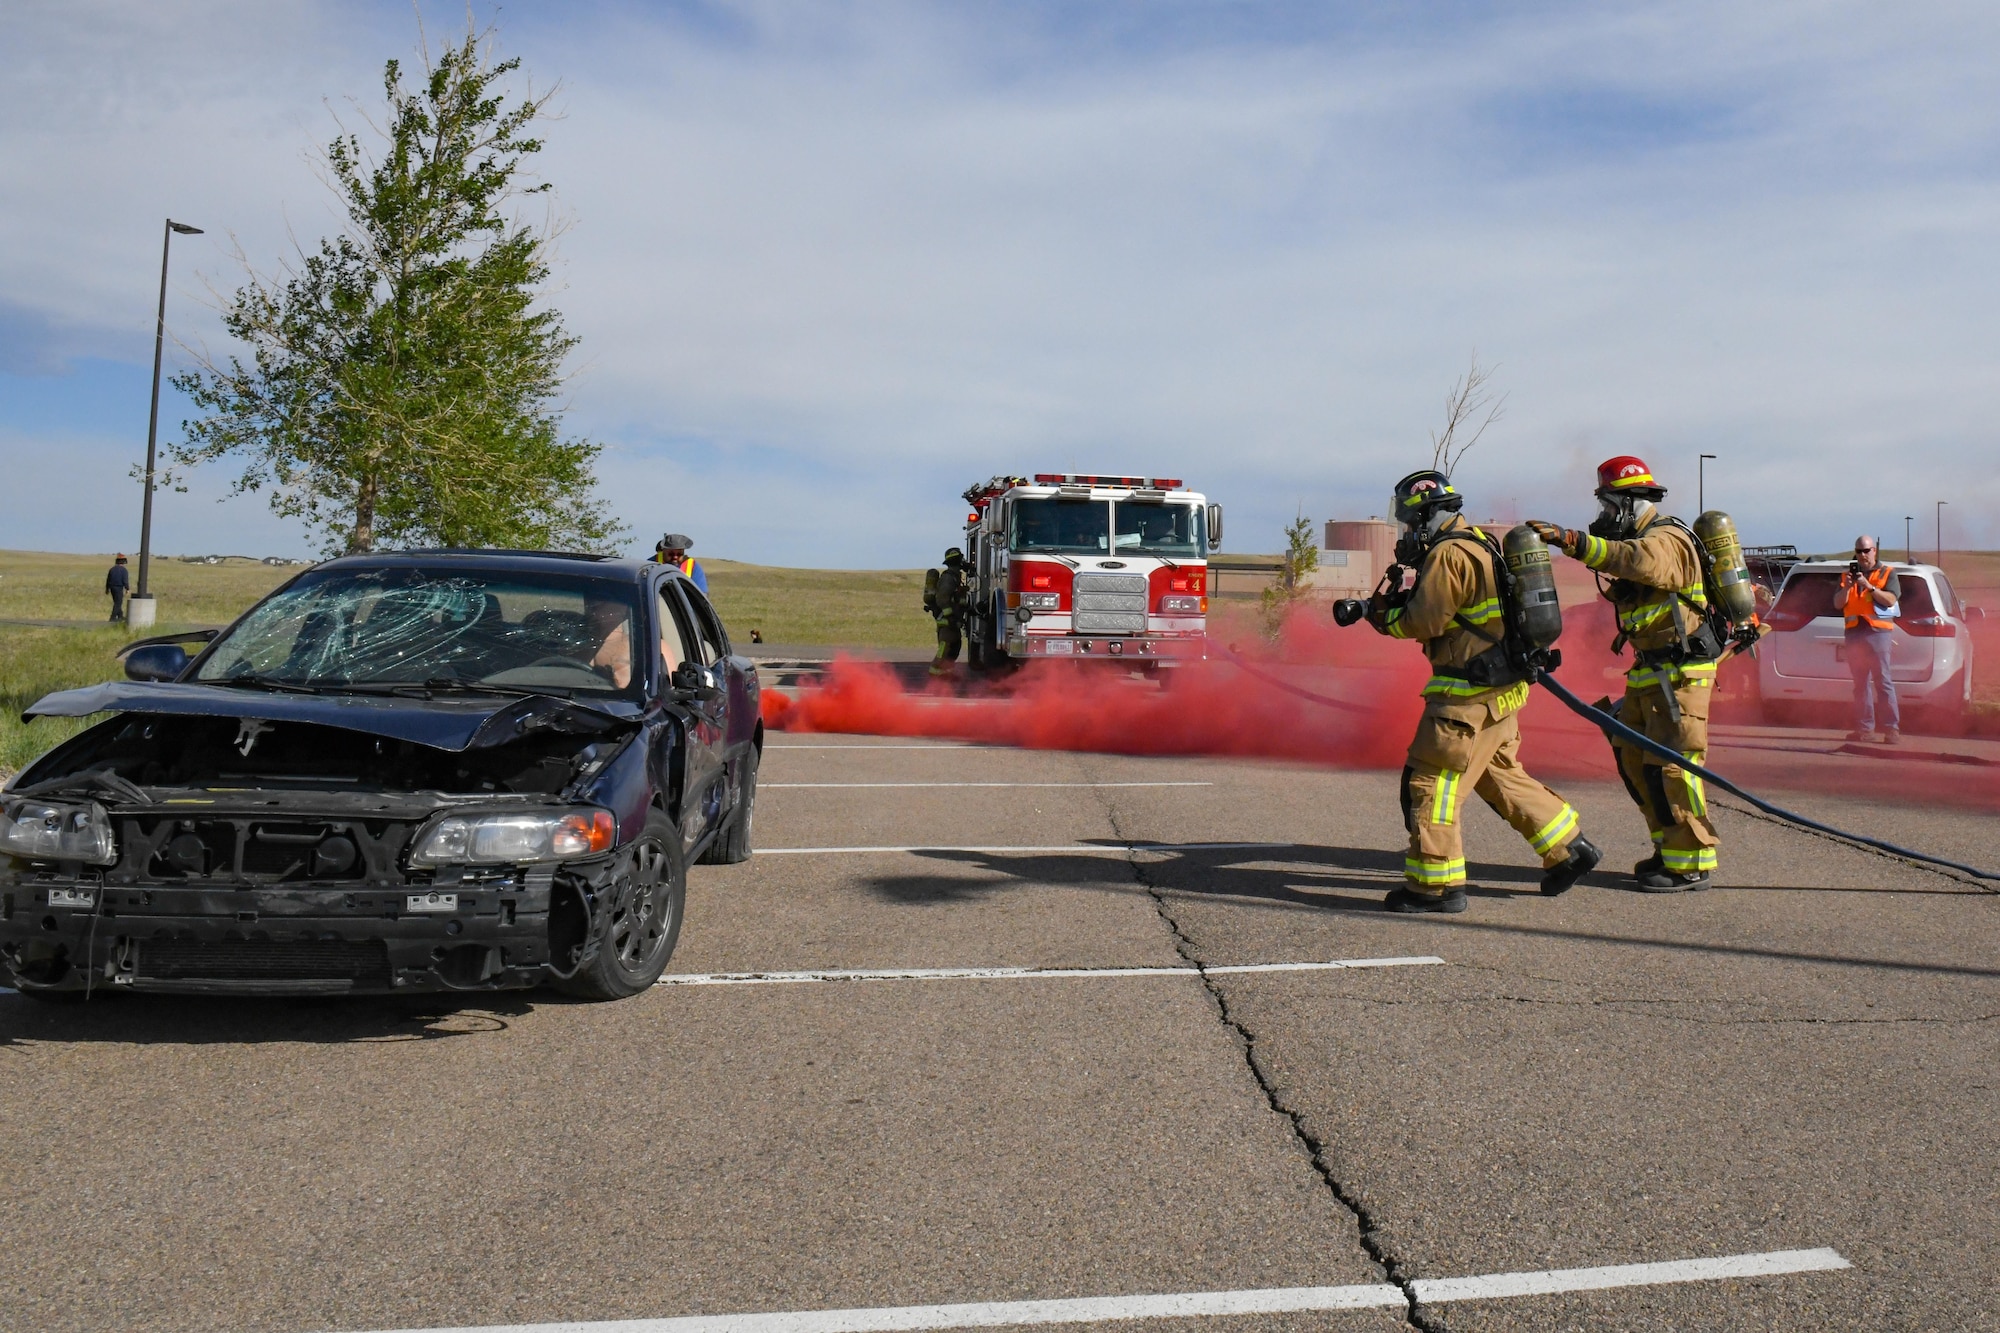 90th Civil Engineer Squadron firefighters respond to a damaged vehicle during the 2022 major accident response exercise, June 29, 2022, on F.E. Warren Air Force Base, Wyoming. Firefighters rushed-in to transport injured to be triaged by medical providers. (U.S. Air Force photo by Landon Gunsauls)